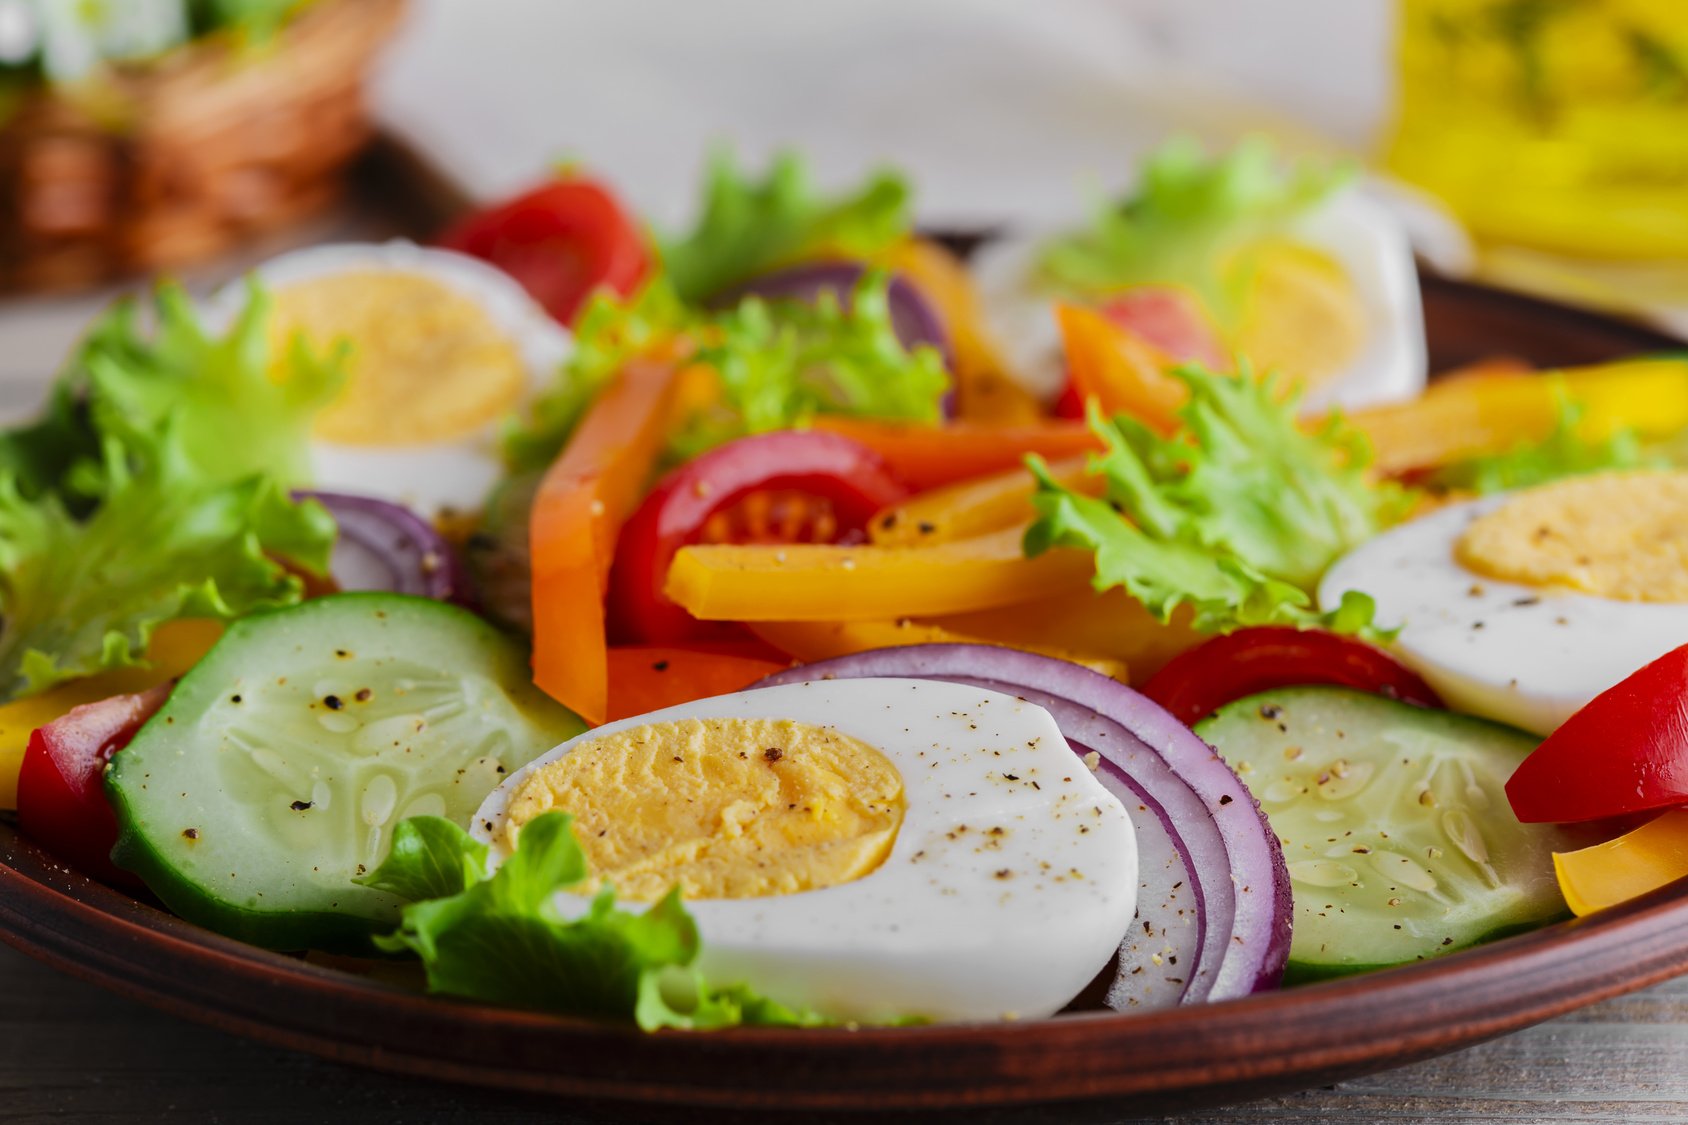 vegetable salad with pepper tomato cucumber and egg